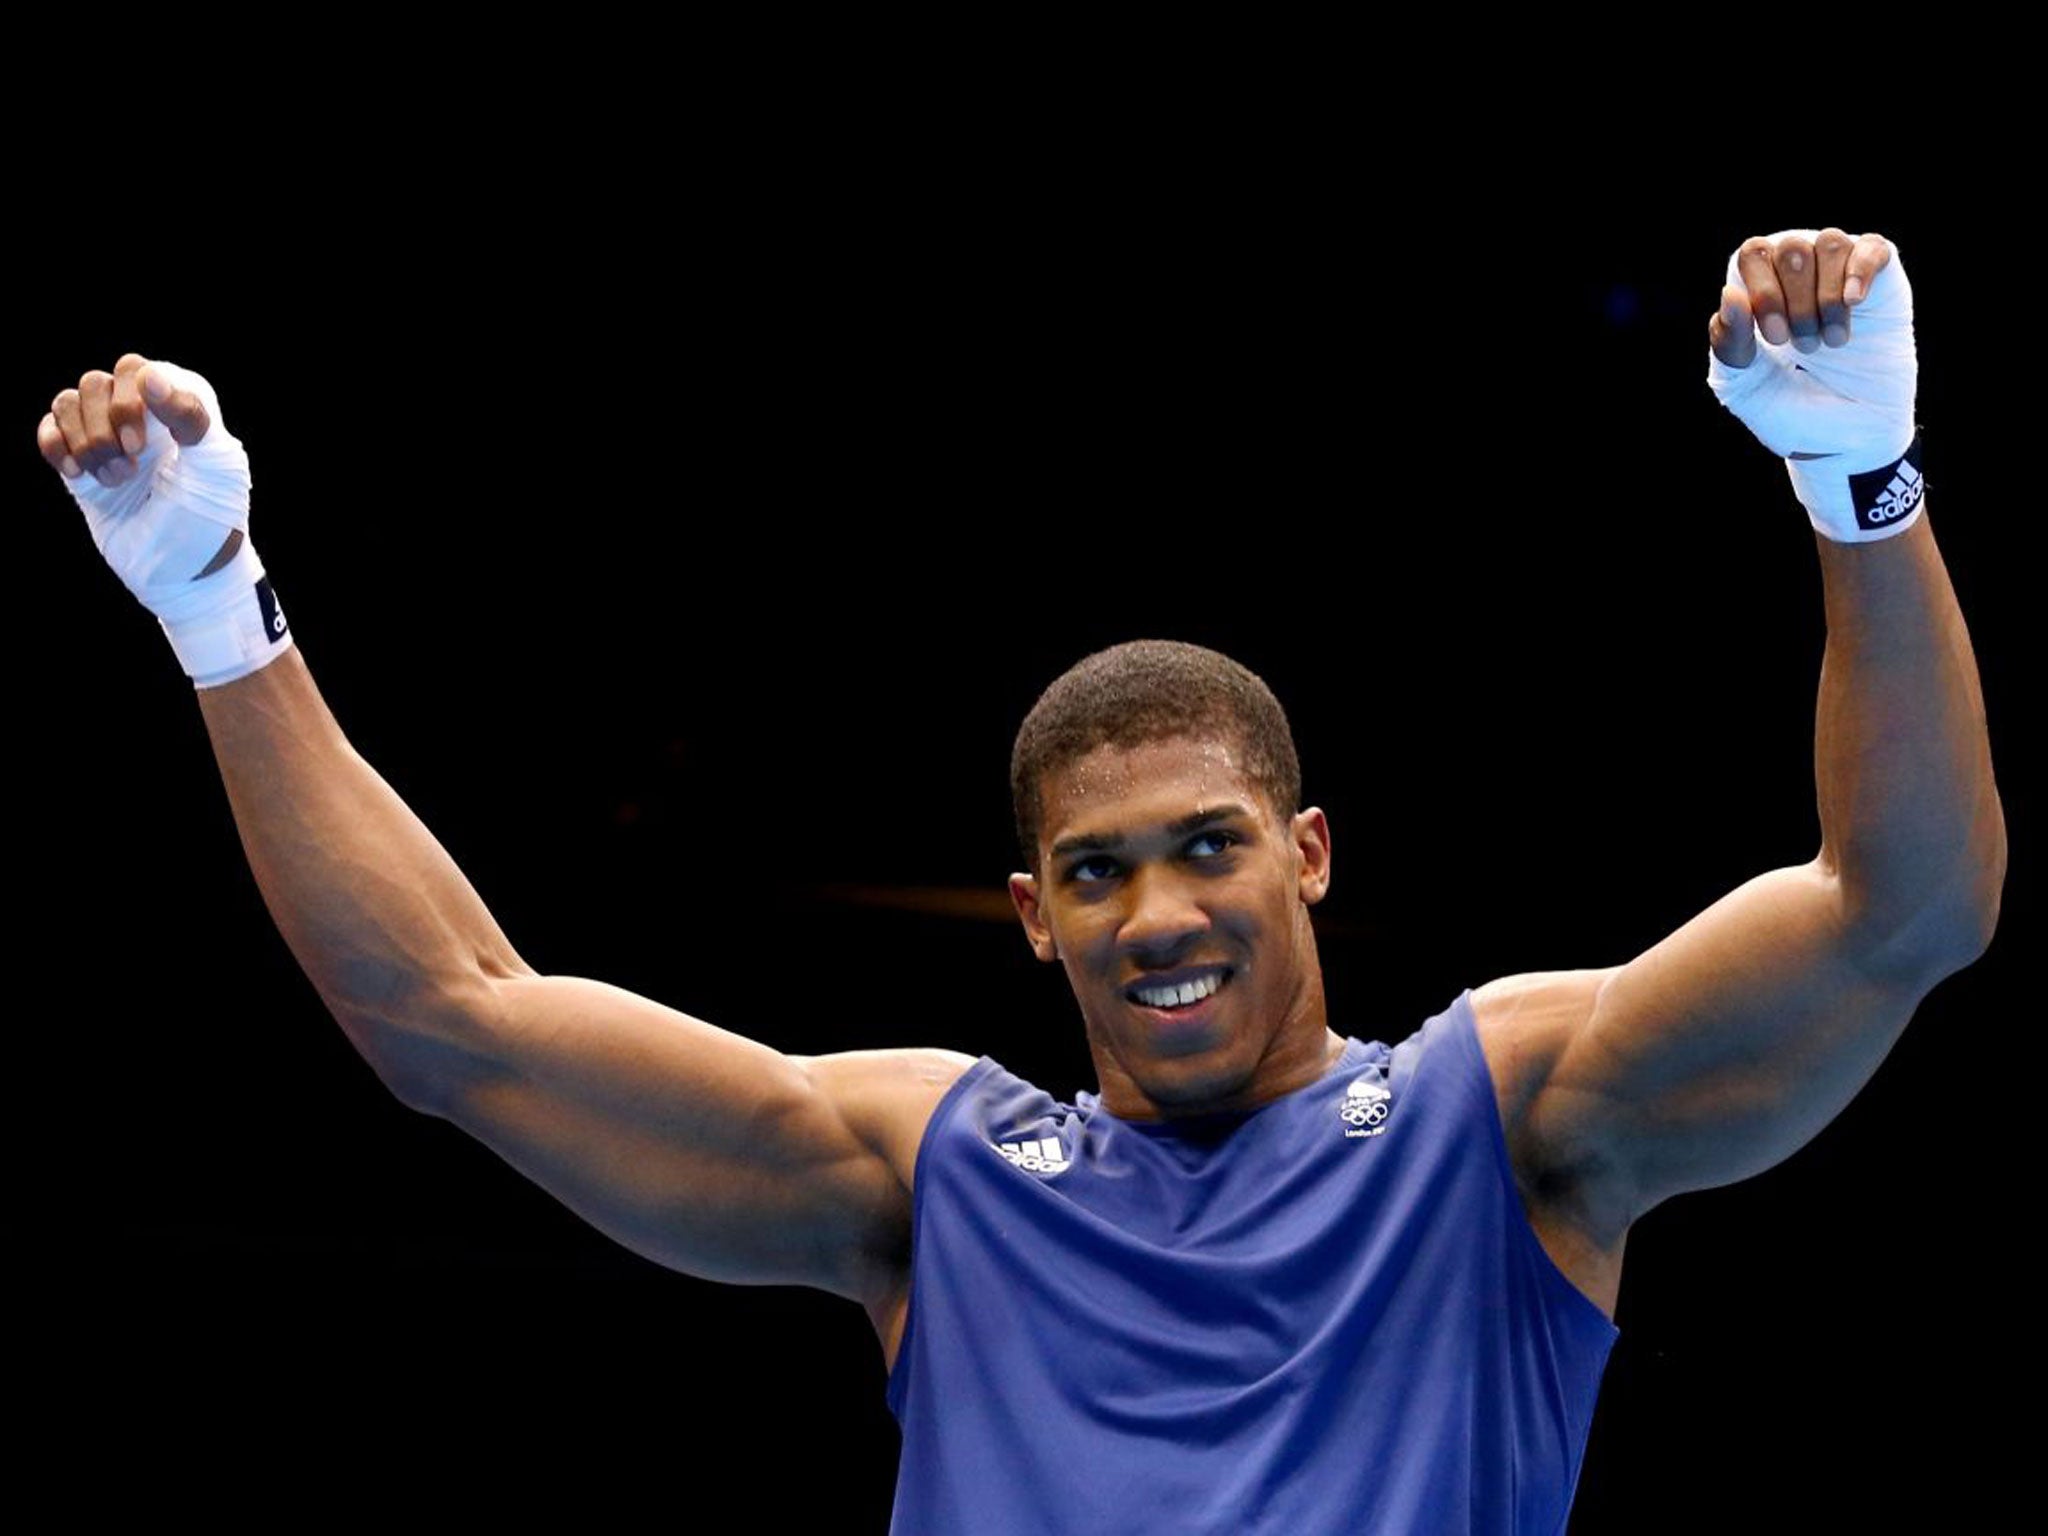 Anythony Joshua has not fought since winning the Olympic super-heavyweight gold medal